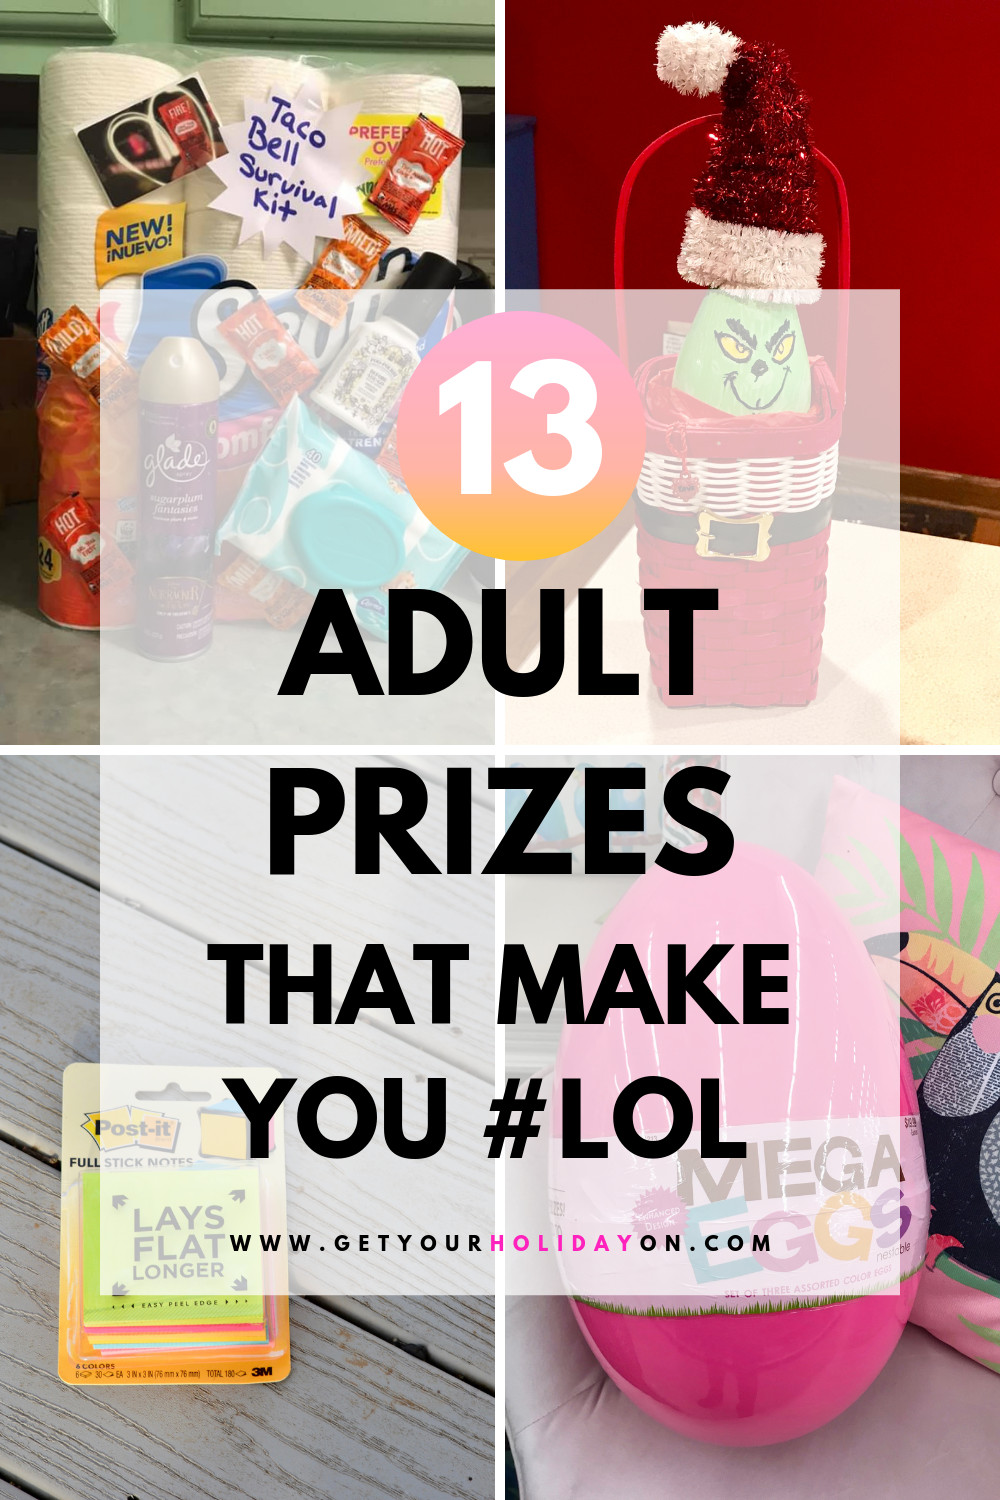 Fun Competition Ideas For Adults
 What To Use For Adult Game Prizes